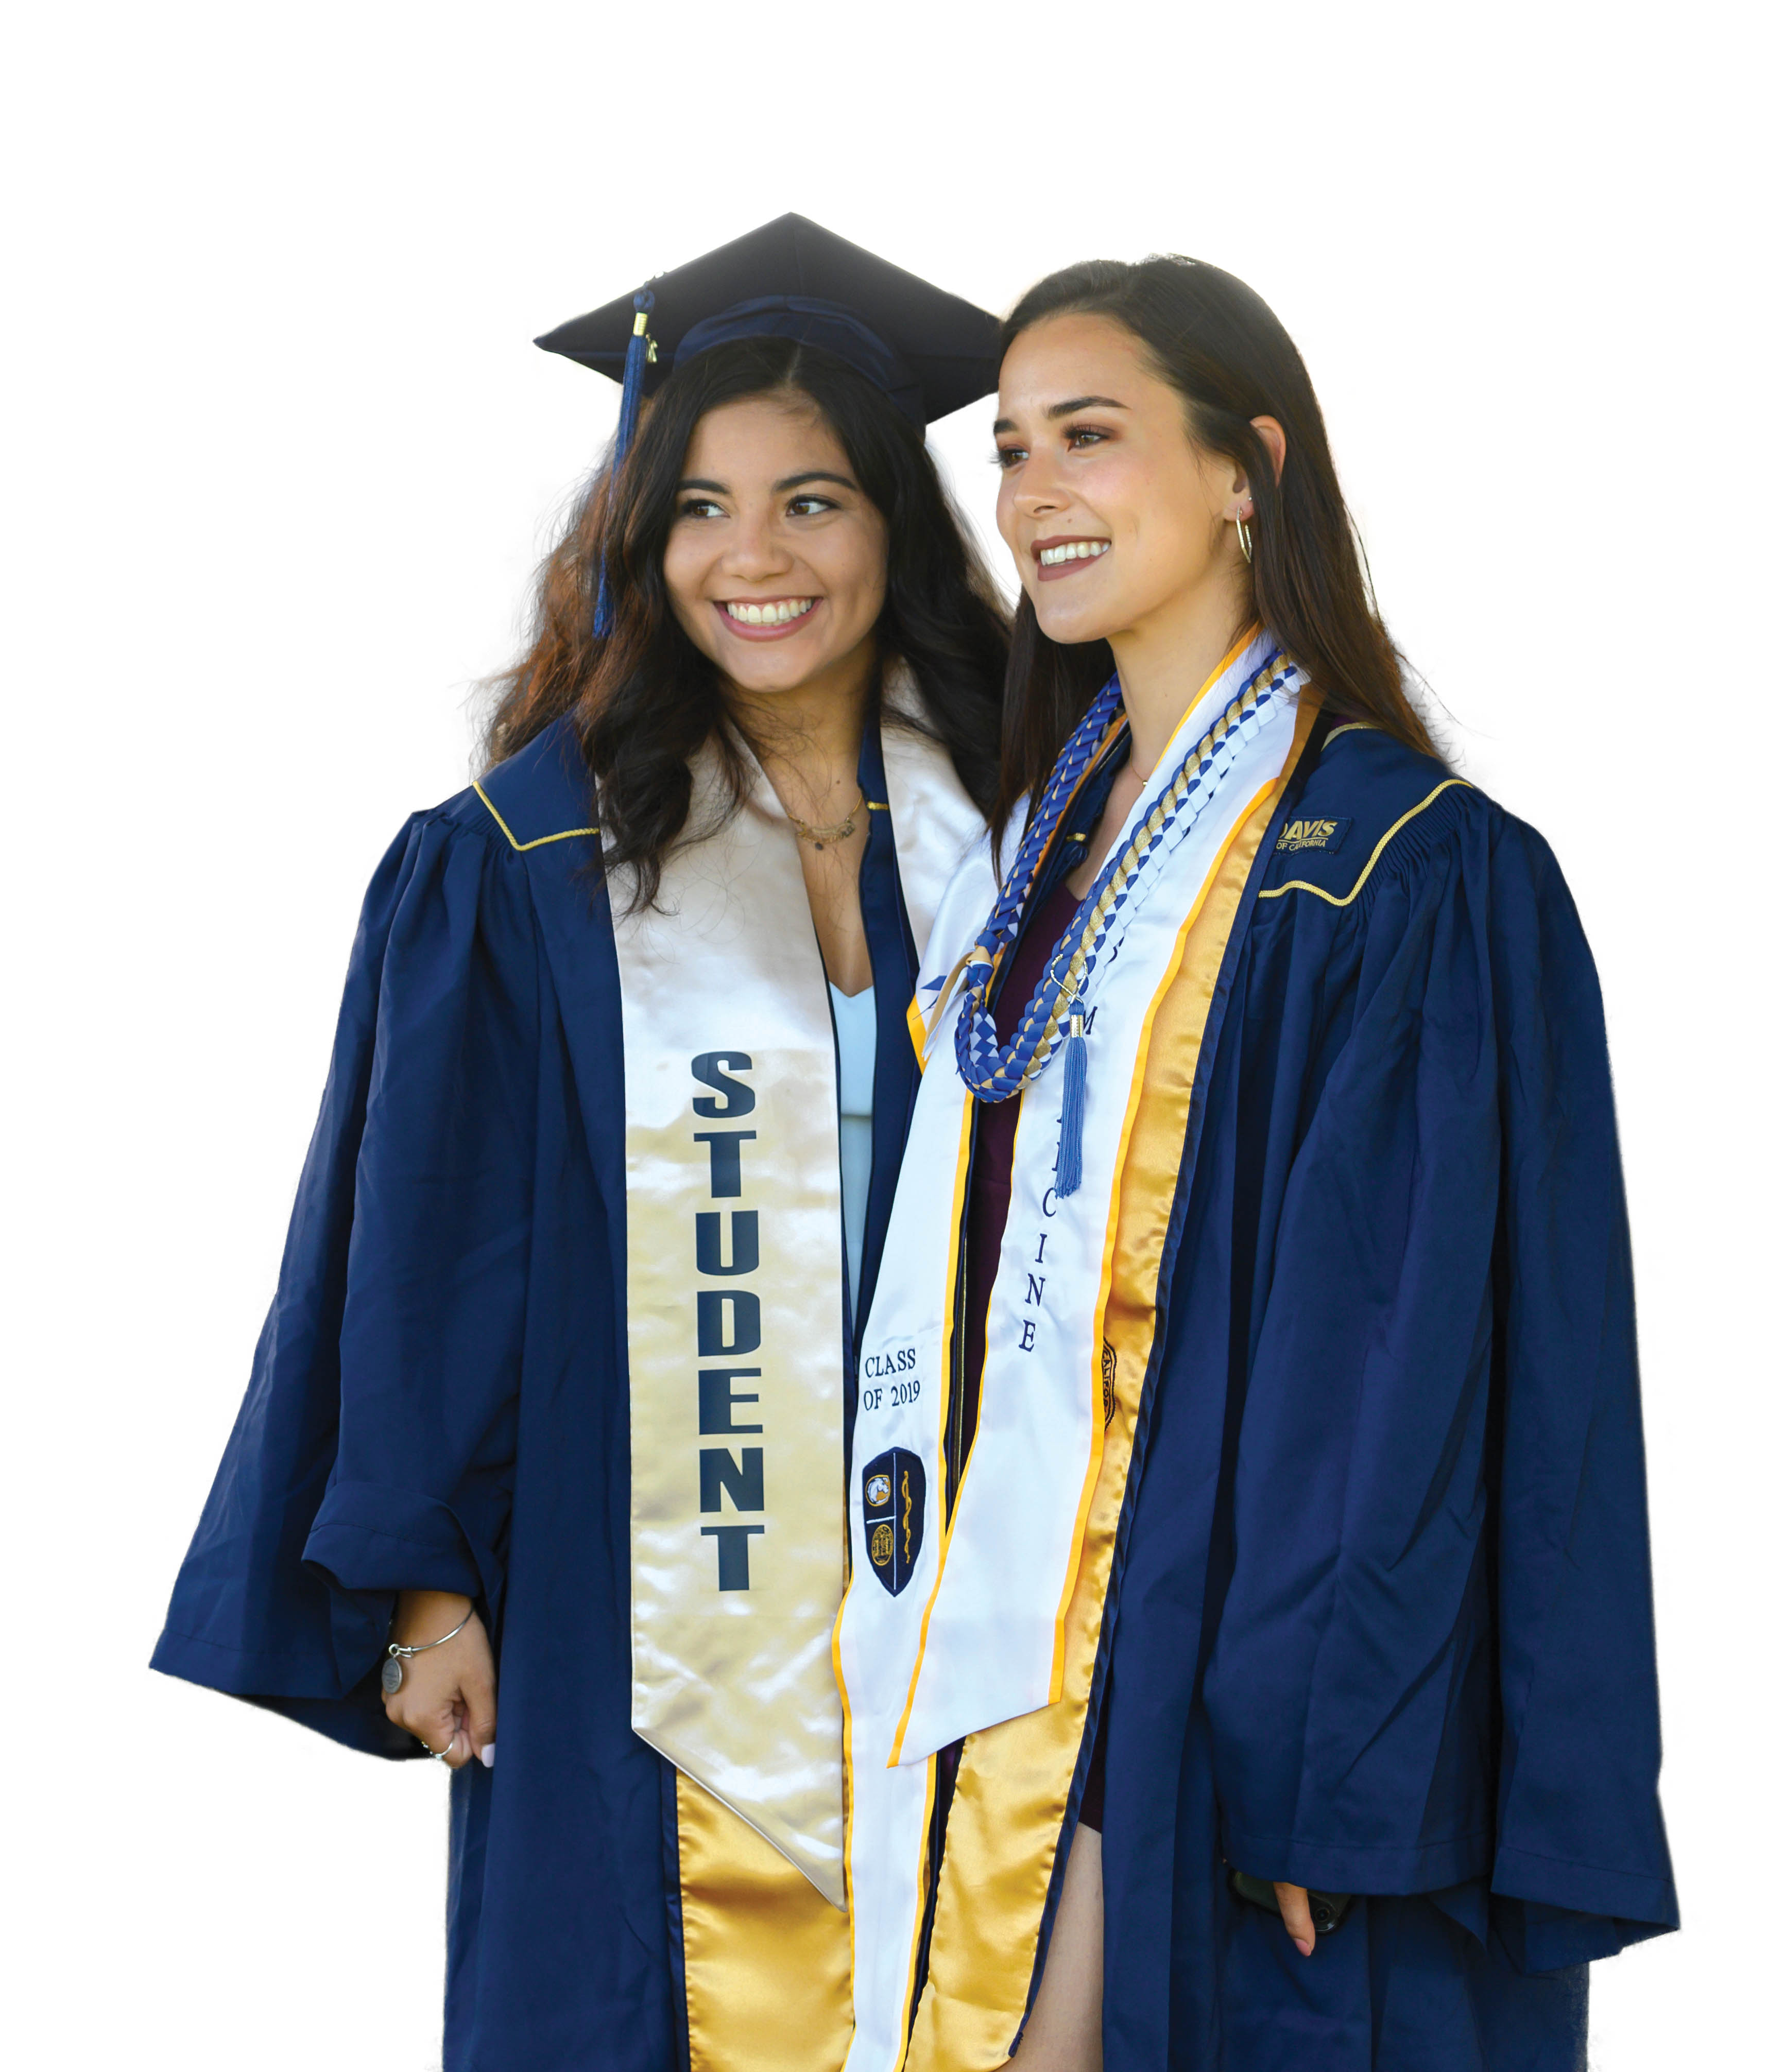 Photo of two young female graduating students in commencement gowns